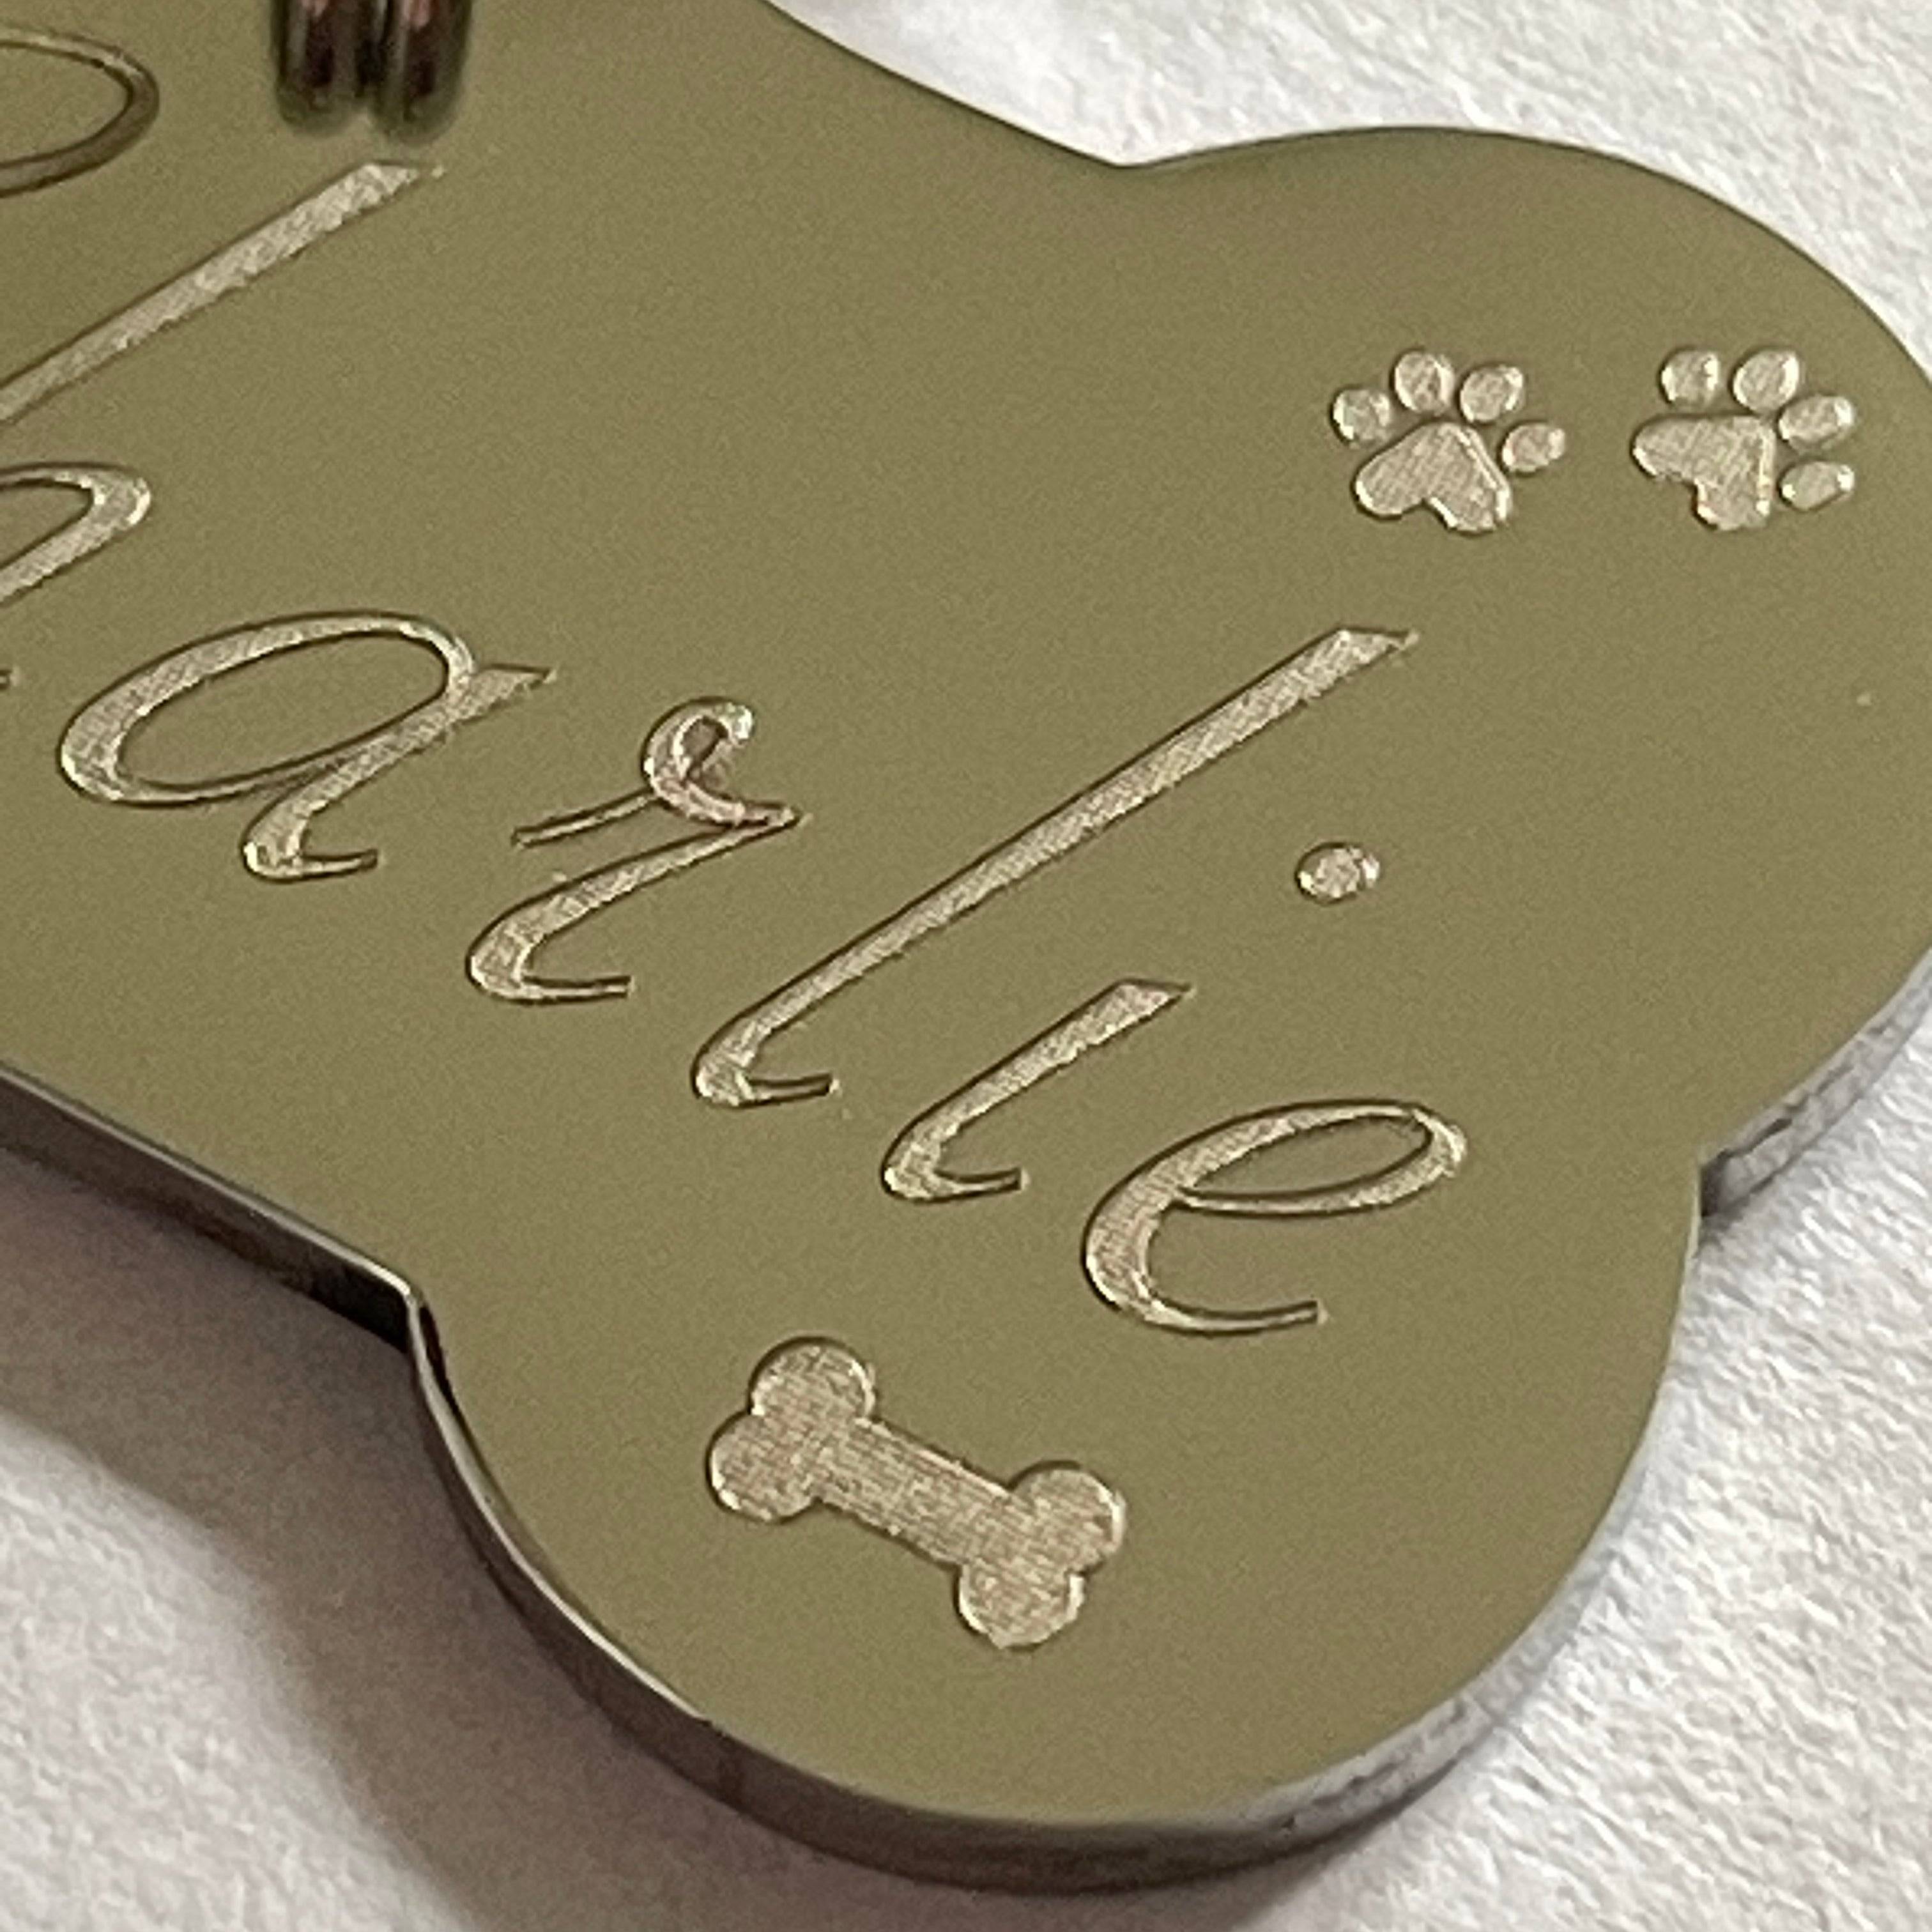 Dog Bone Pet Tag with Hearts or Paw Prints